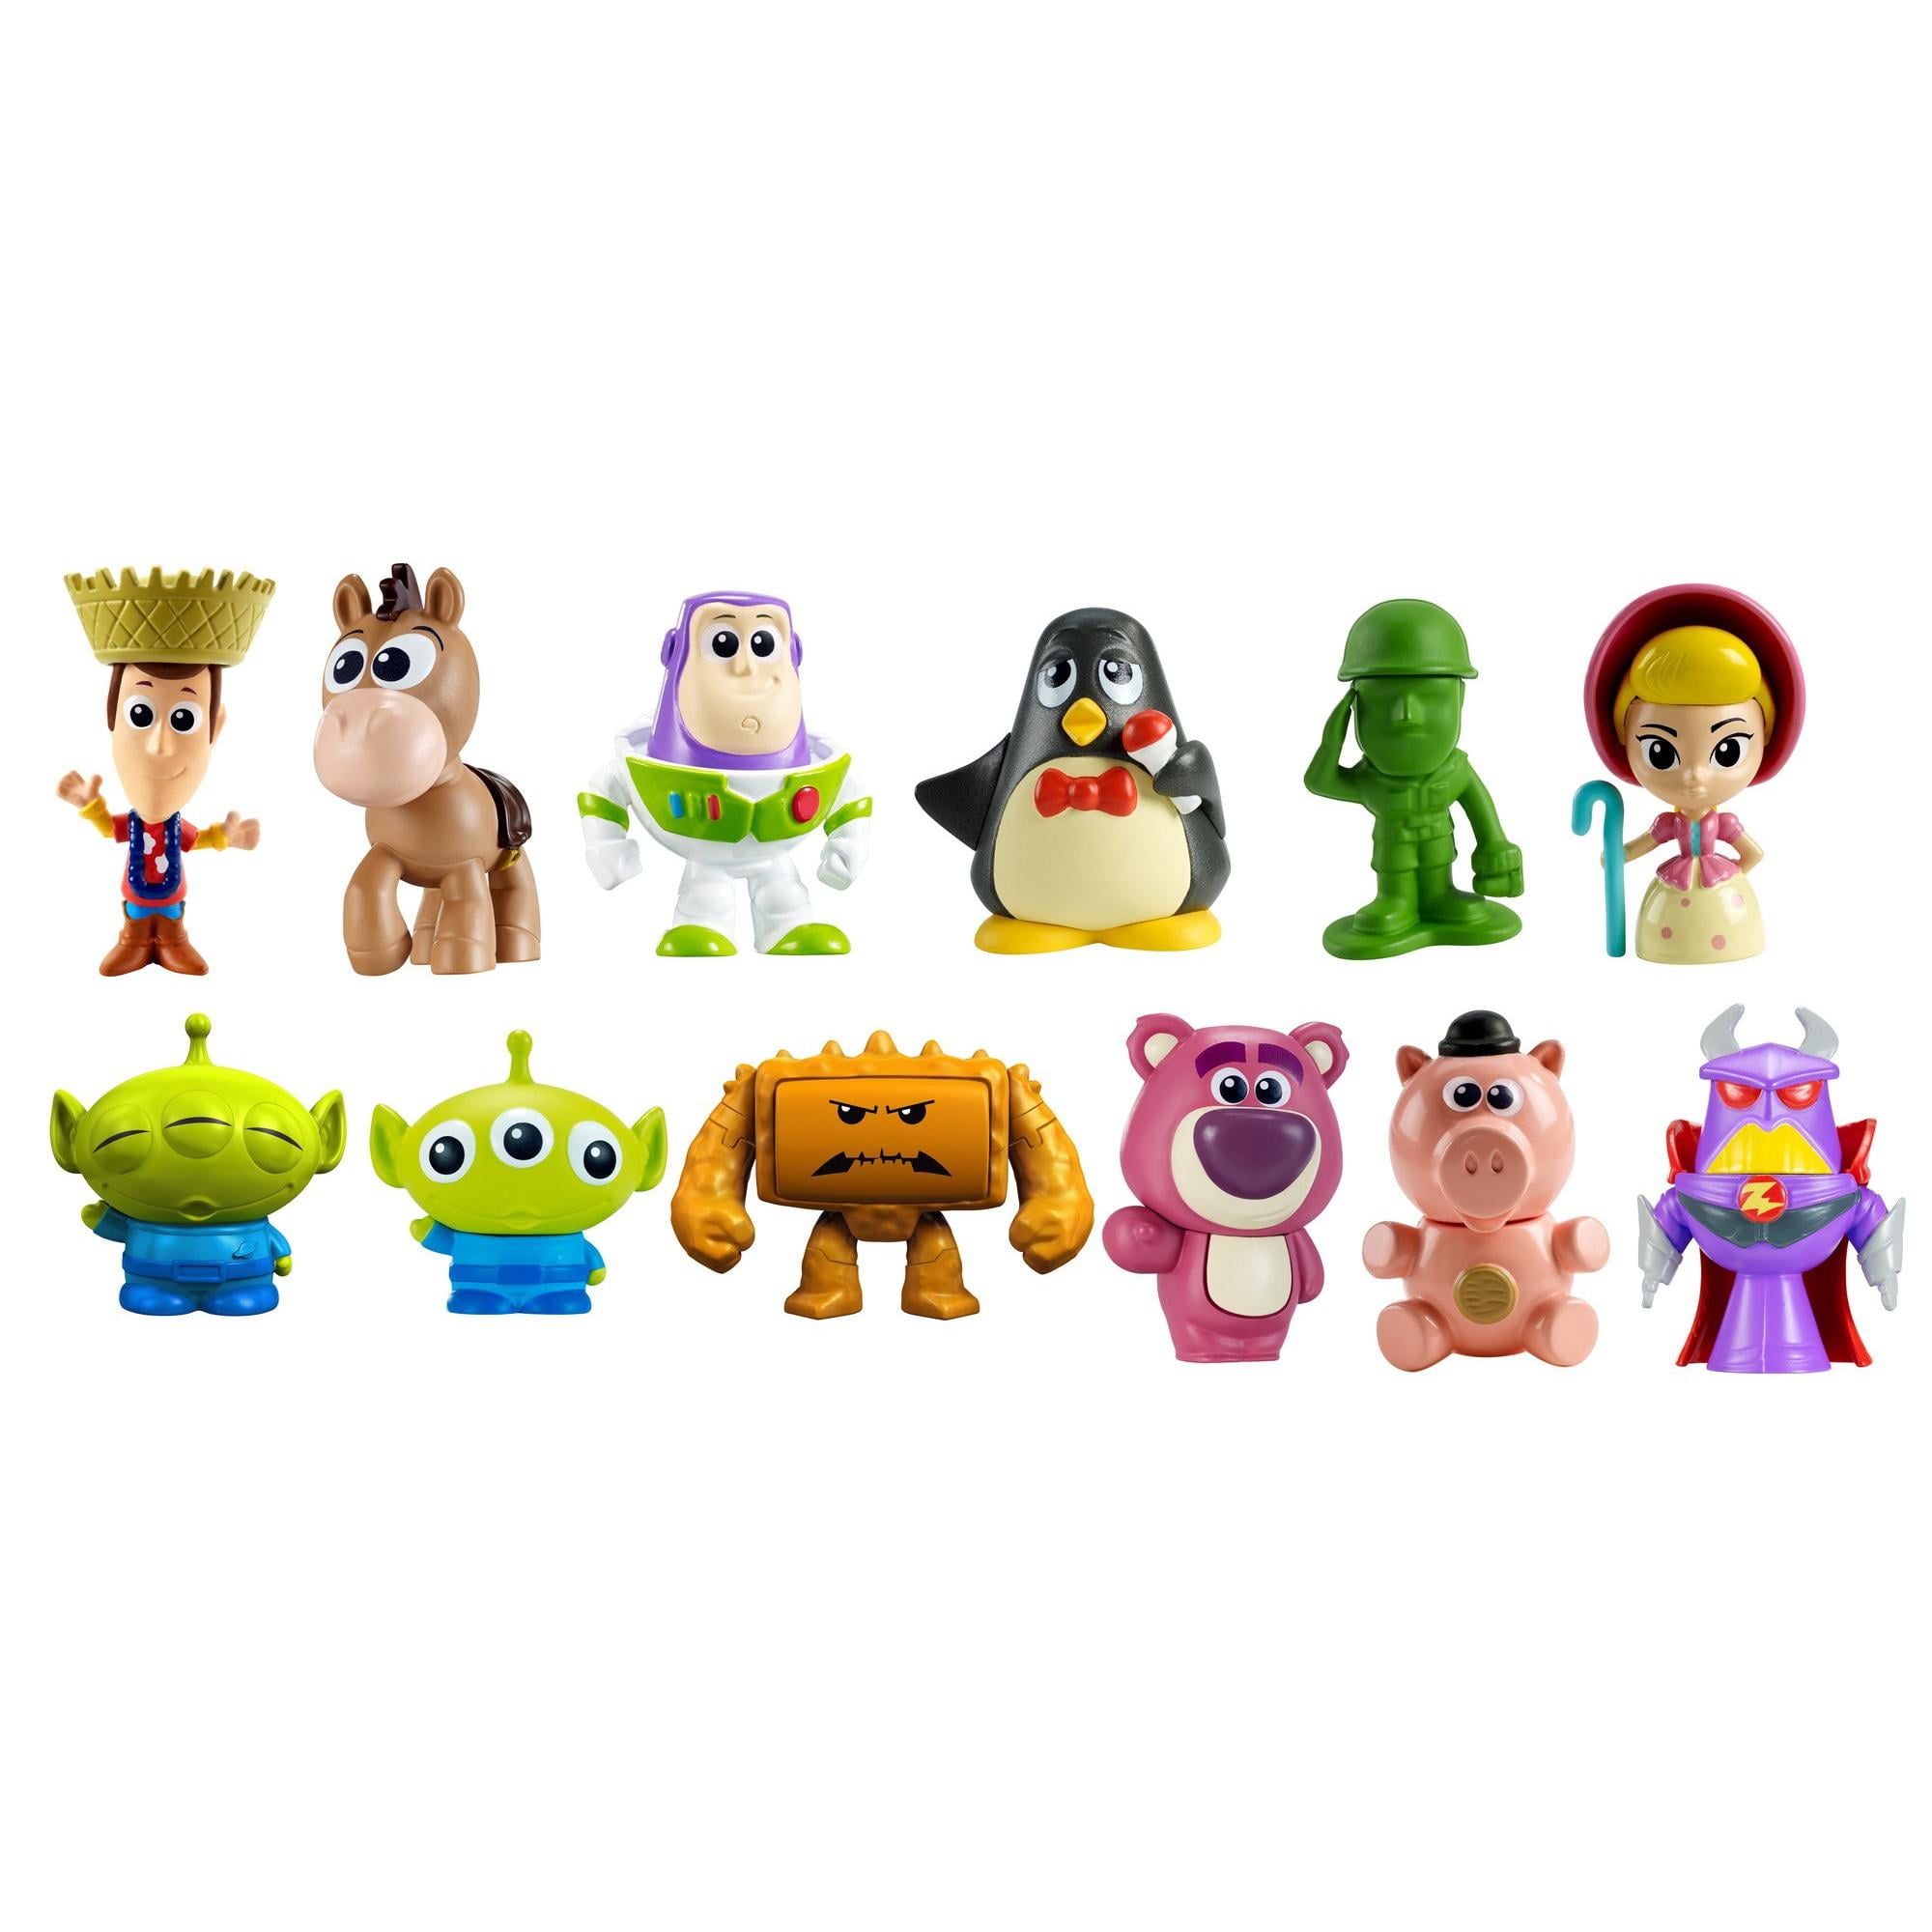 Pixar Toy Story Minis ALIEN Figure Blind Bag Andys Toy Chest 2020